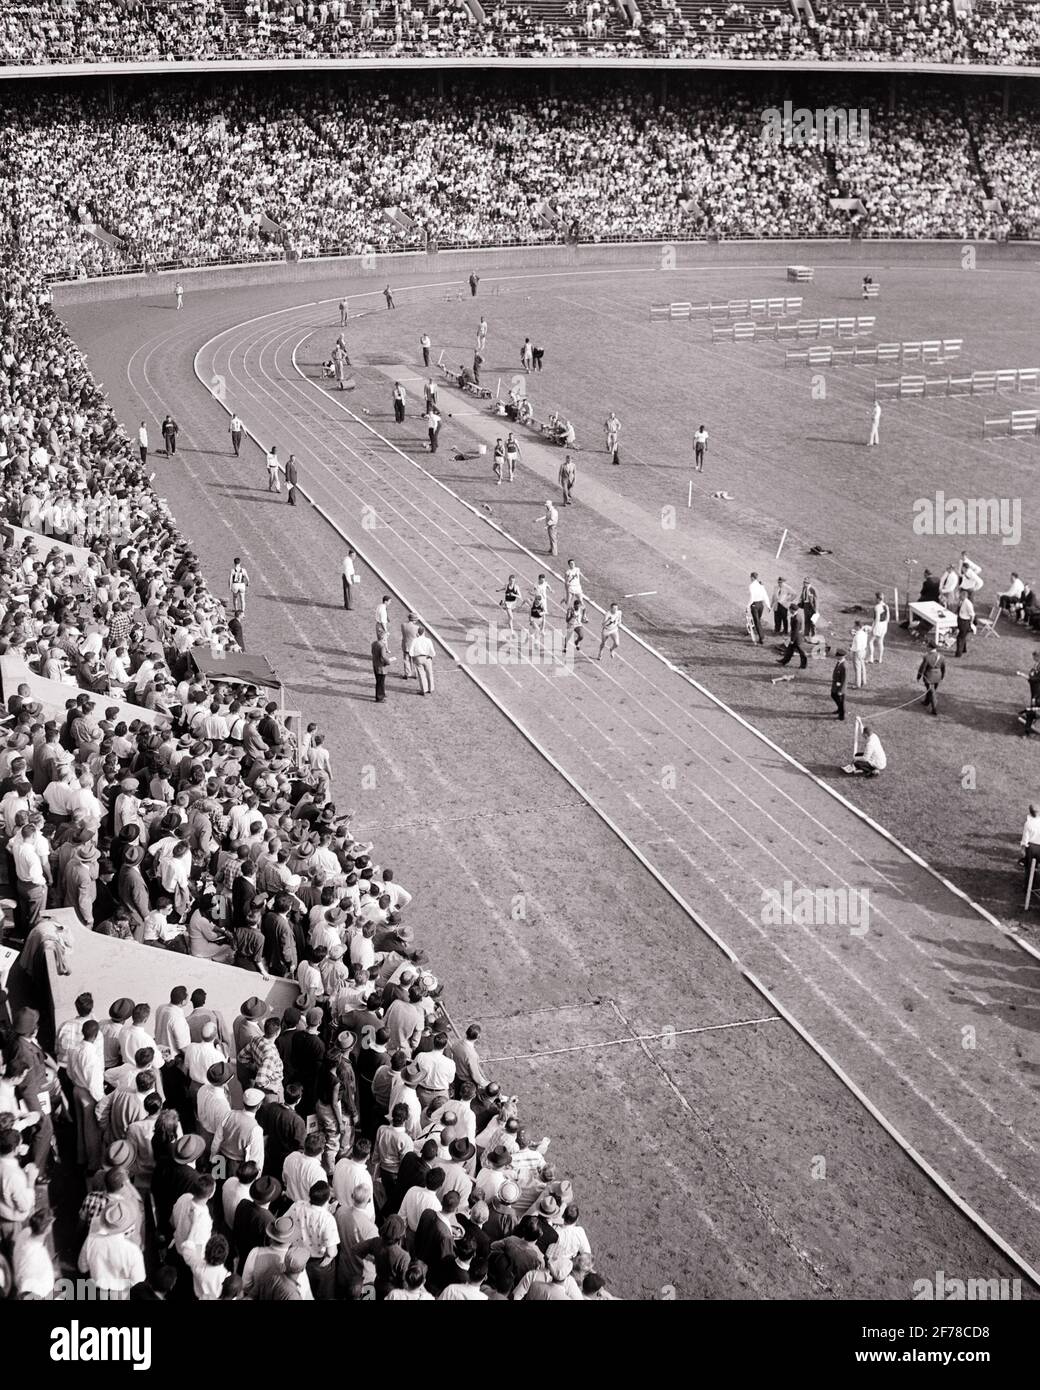 1950s 1956 PENN RELAYS ANNUAL TRACK AND FIELD ATHLETIC COMPETITION FRANKLIN FIELD UNIVERSITY OF PENNSYLVANIA PHILADELPHIA PA USA - s3608 HAR001 HARS PERSONS MALES TEENAGE BOY CARNIVAL SPECTATORS B&W GOALS SCHOOLS DREAMS WELLNESS HIGH ANGLE ADVENTURE STRENGTH UNIVERSITIES AND EXCITEMENT EXTERIOR PA PENN HIGH SCHOOL HIGH SCHOOLS HIGHER EDUCATION 1956 TEENAGED COLLEGES 1895 COOPERATION GROWTH JUVENILES MID-ADULT MID-ADULT MAN YOUNG ADULT MAN ANNUAL BLACK AND WHITE HAR001 LARGEST OLD FASHIONED OLDEST Stock Photo